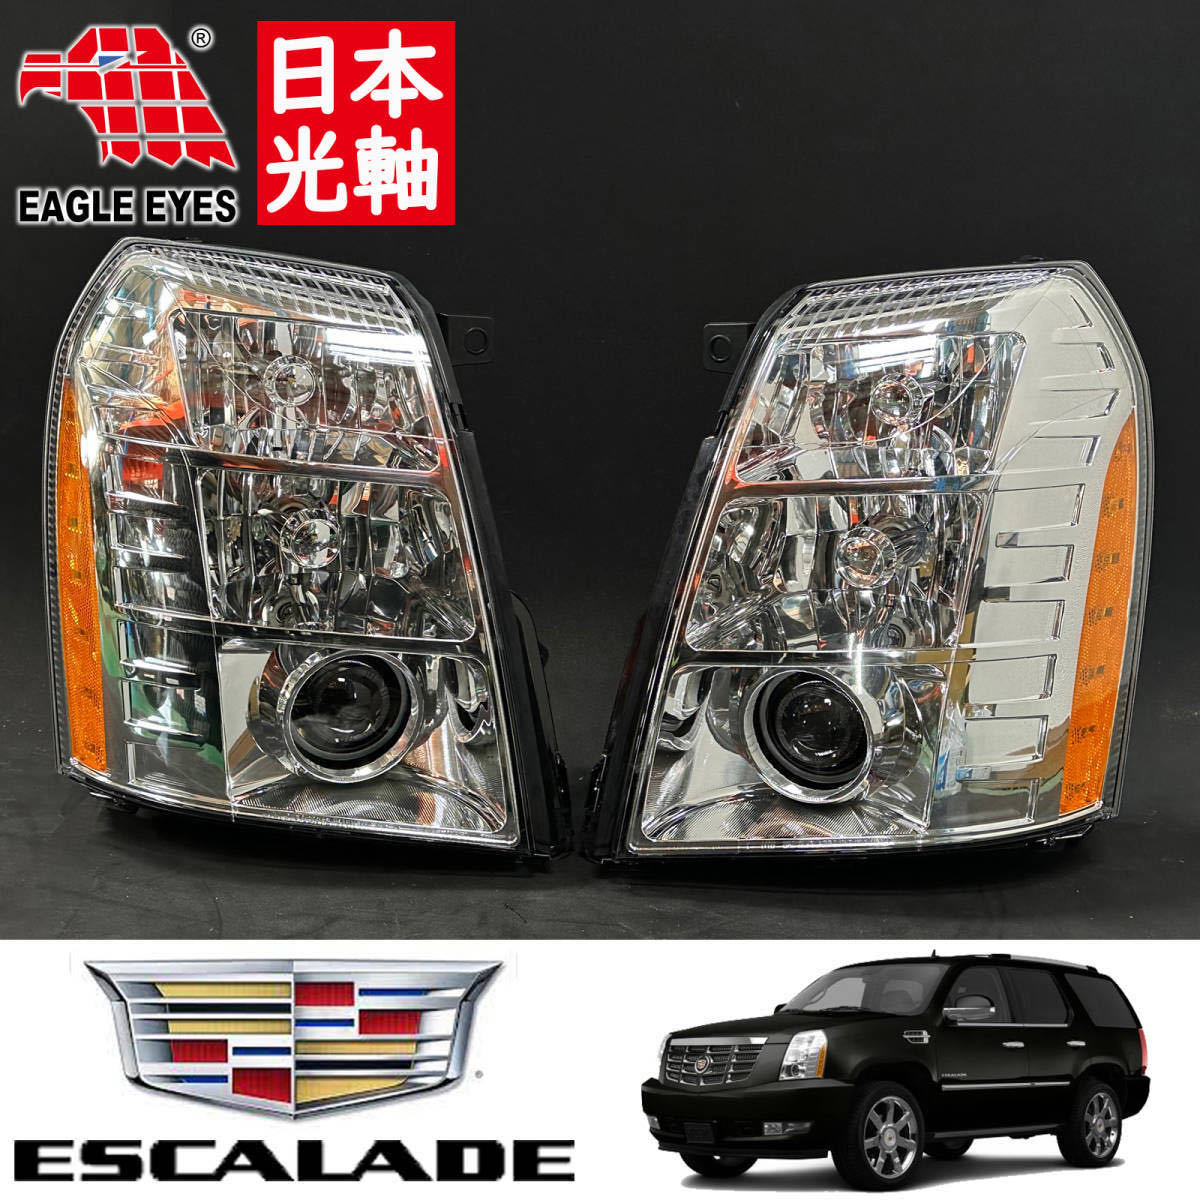  new goods free shipping EAGLE EYE made 07-14y Cadillac Escalade original type HID head light left right set day main specification Japan light axis EXT/ESV xenon 